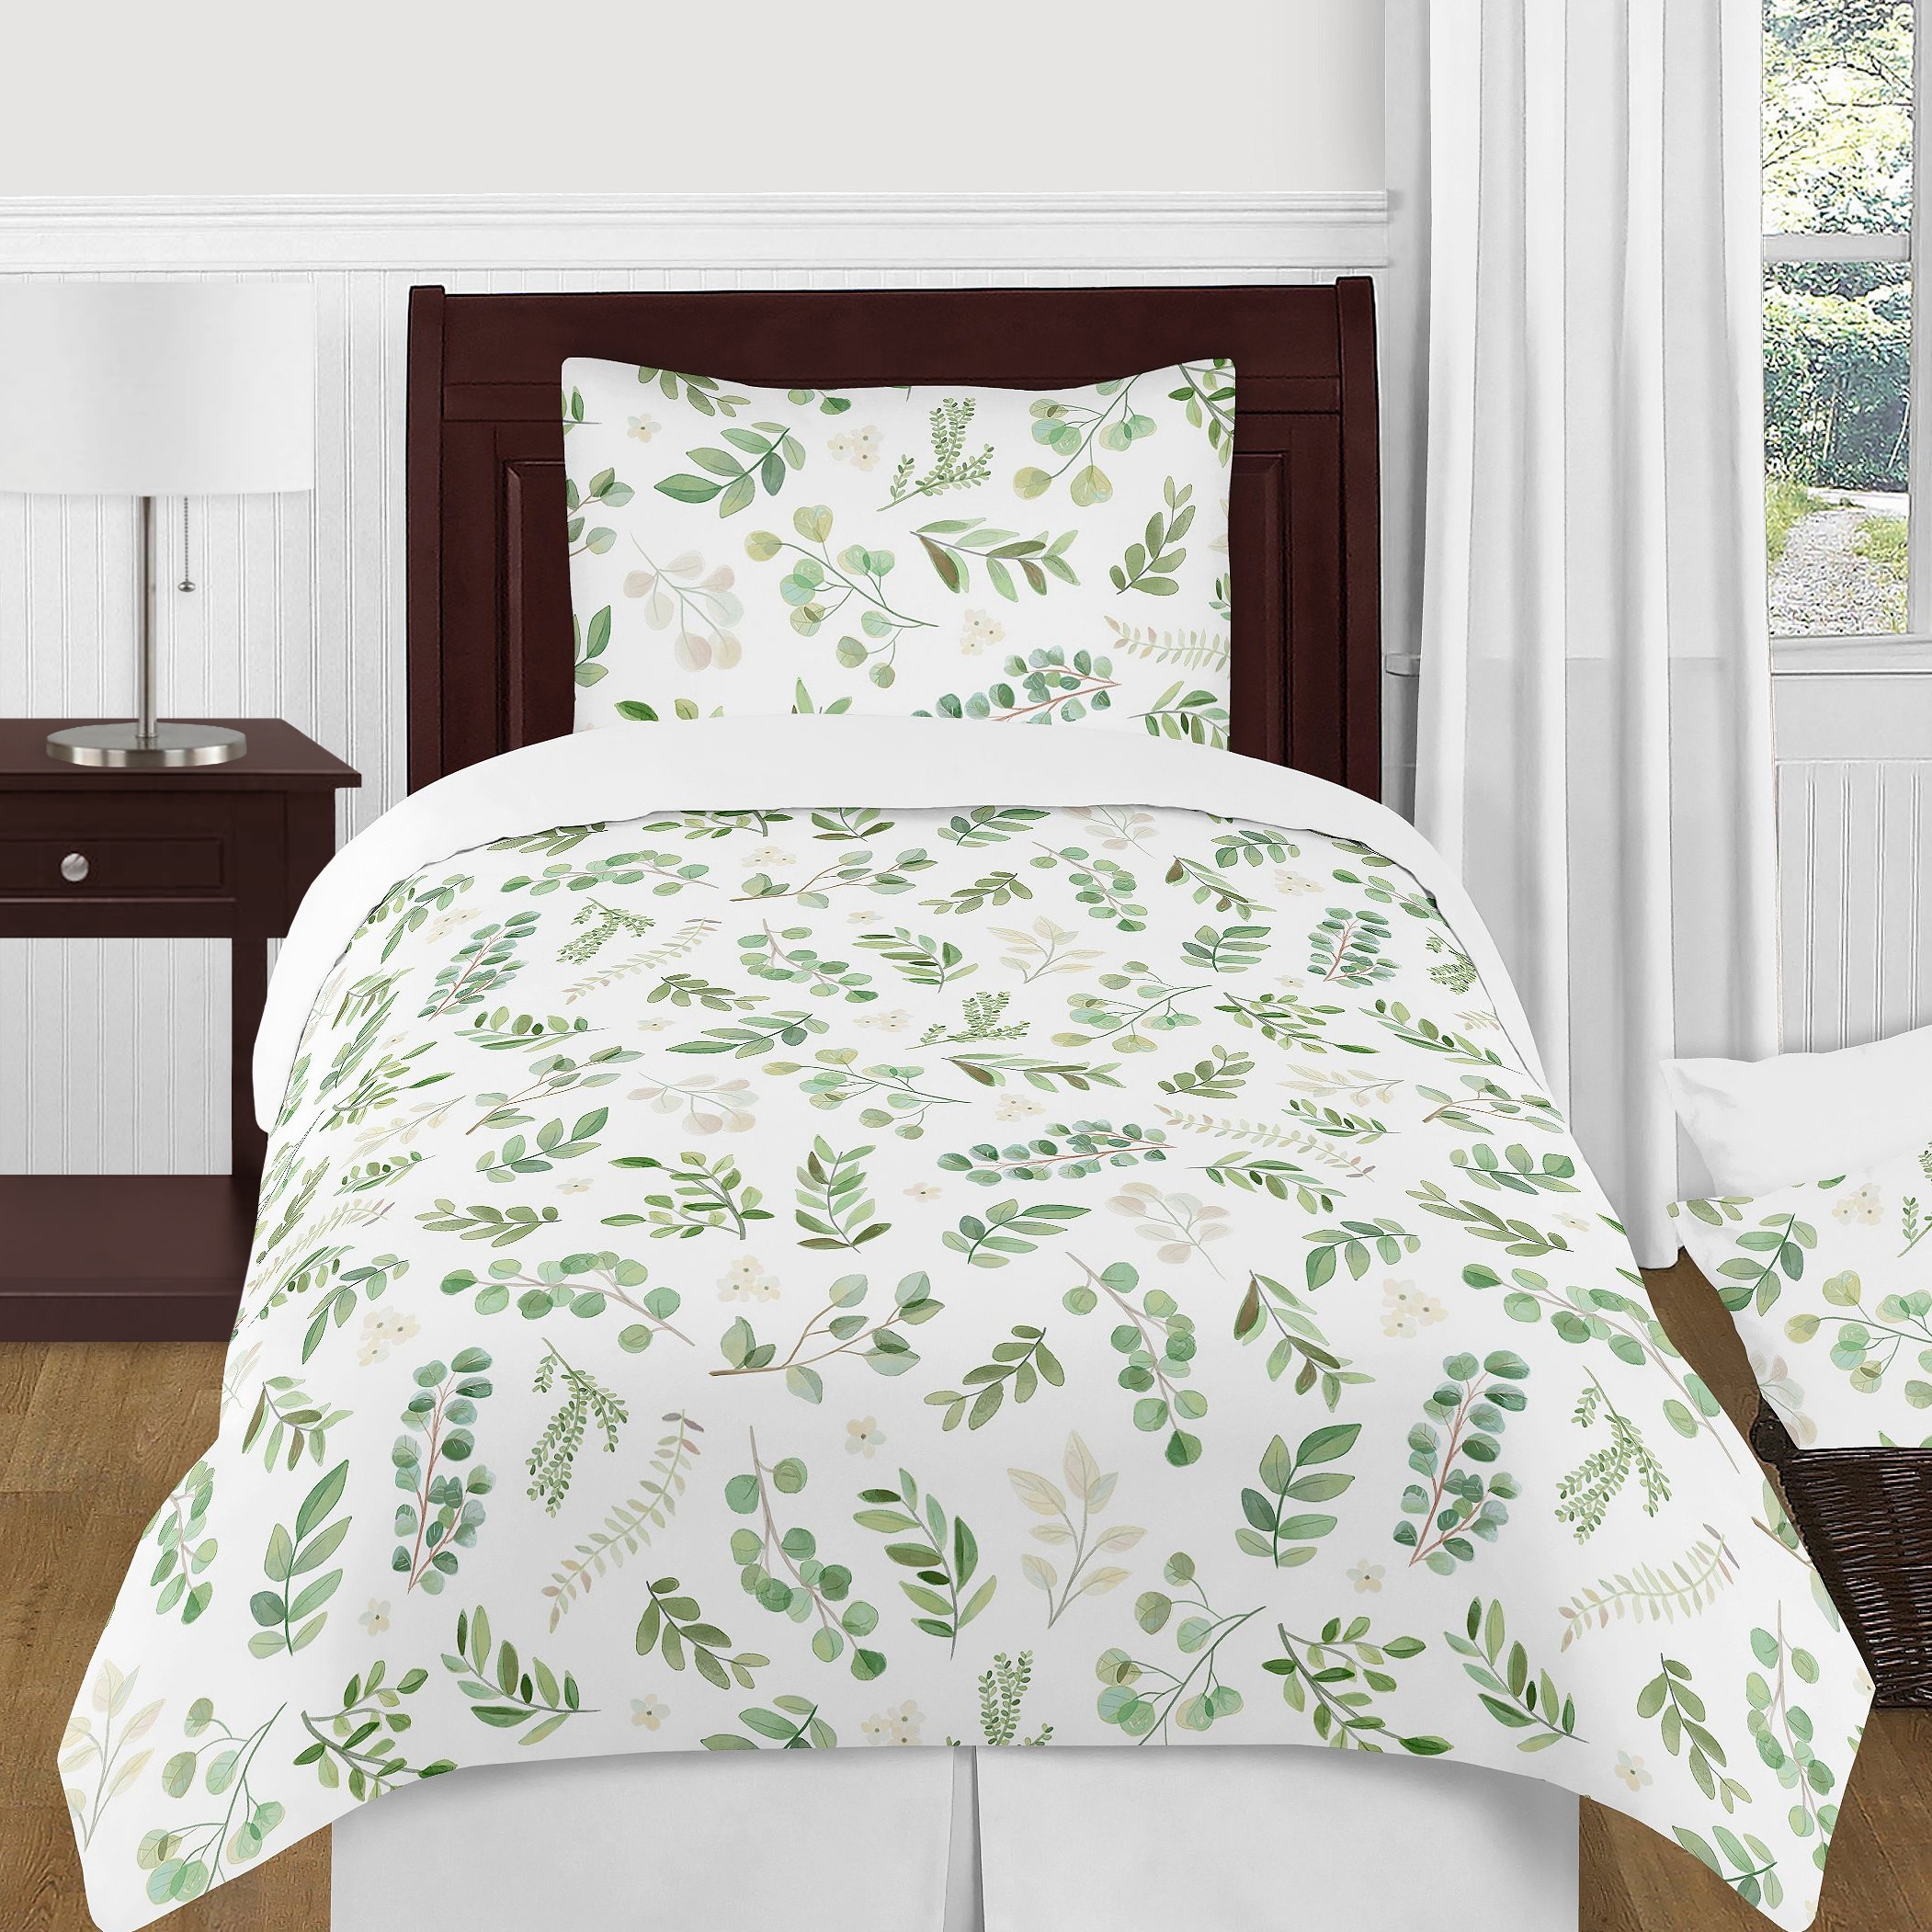 Floral Leaf Collection Girl 4-piece Twin-size Comforter Set Green and White  Boho Watercolor Botanical Woodland Tropical Garden Bed Bath  Beyond  32007648